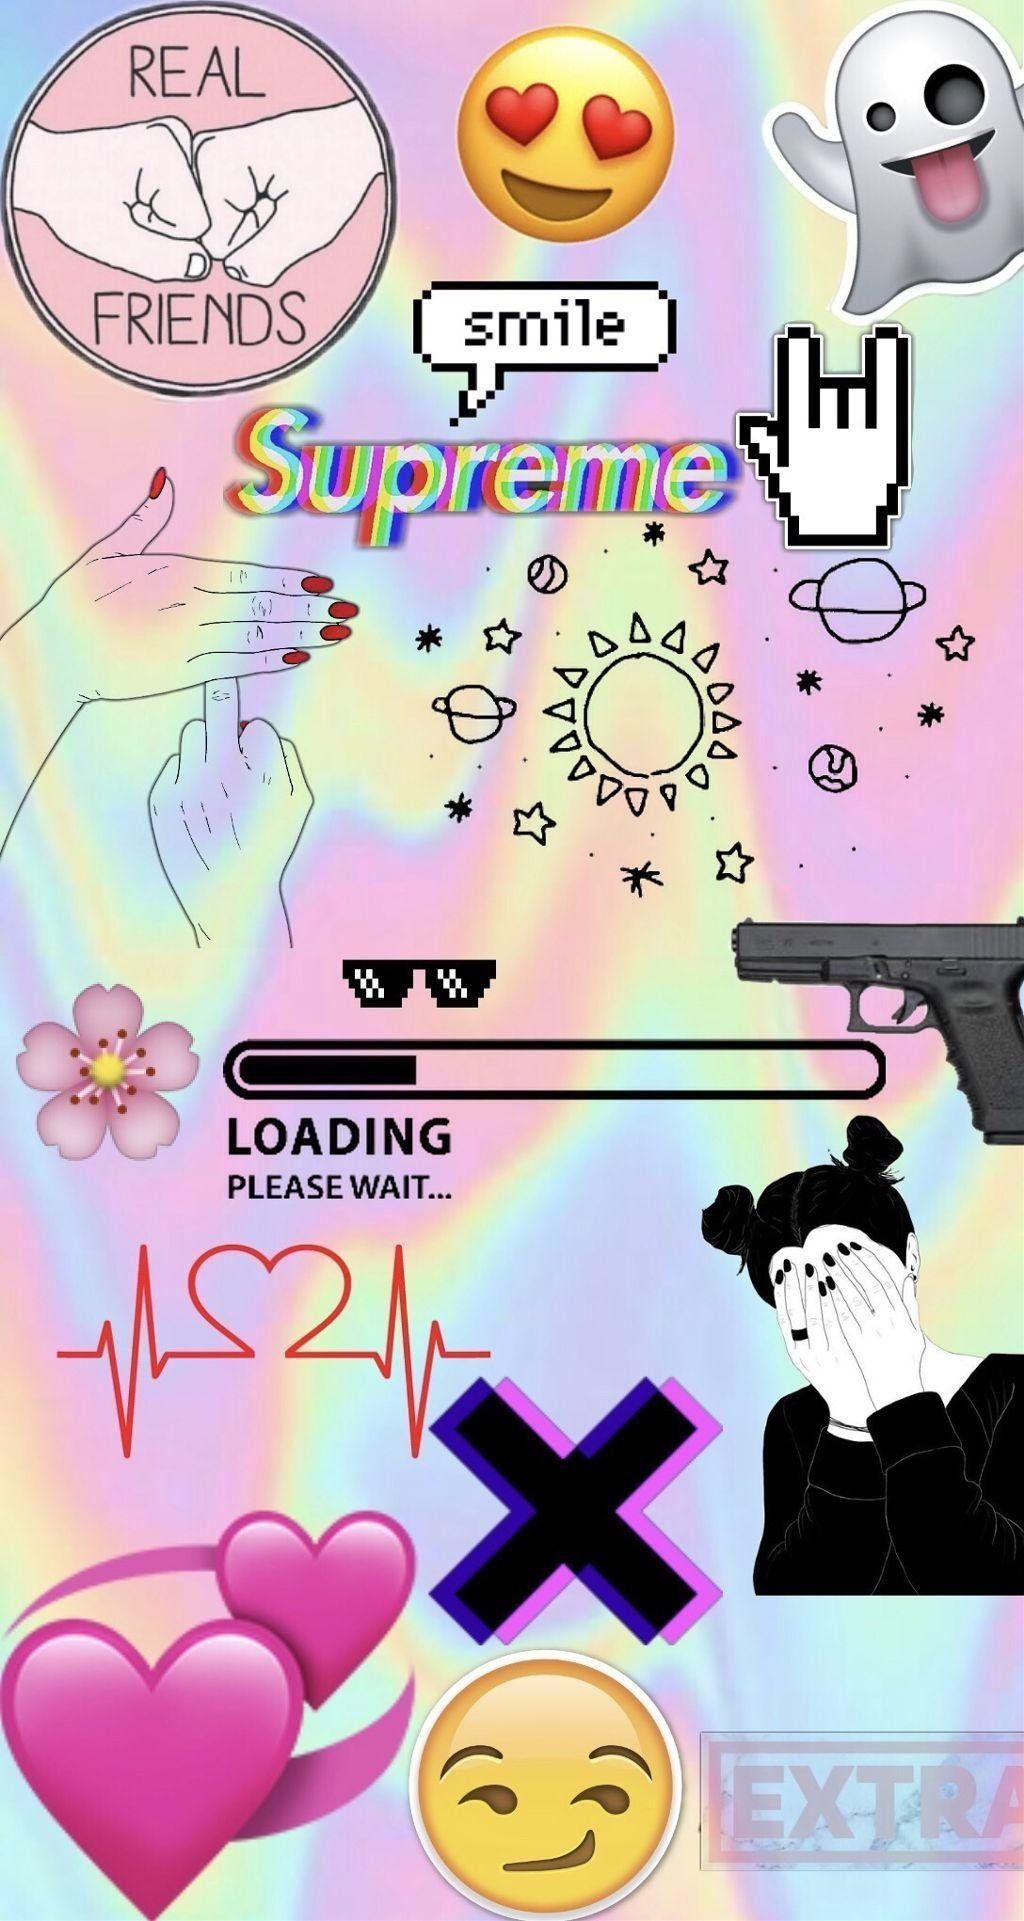 Aesthetic phone background with supreme logo, loading bar, rainbow, gun, smiley face, and other emojis - Graffiti